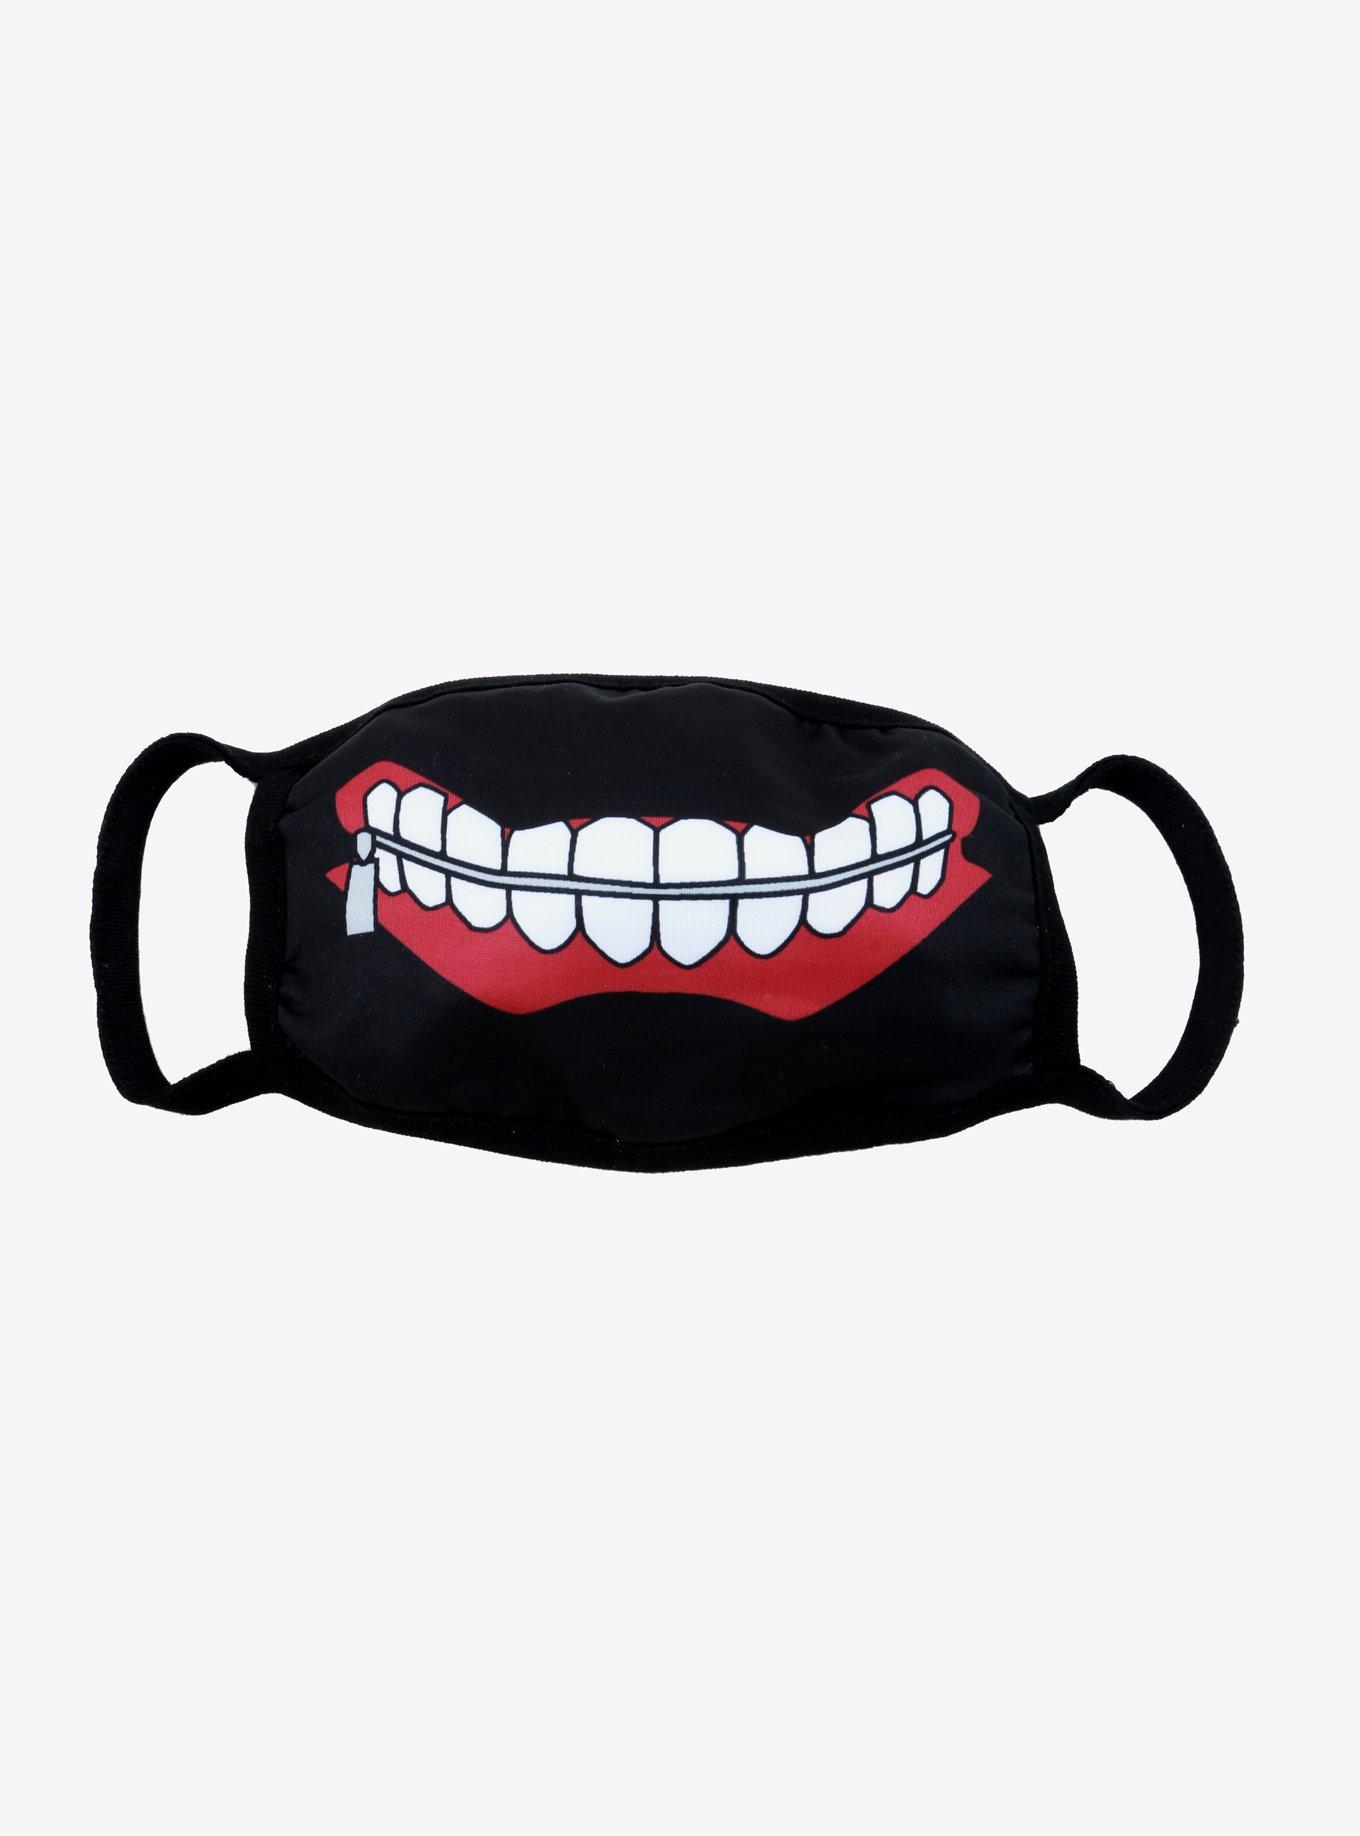 Tokyo Ghoul Mask Fashion Face Mask | Hot Topic